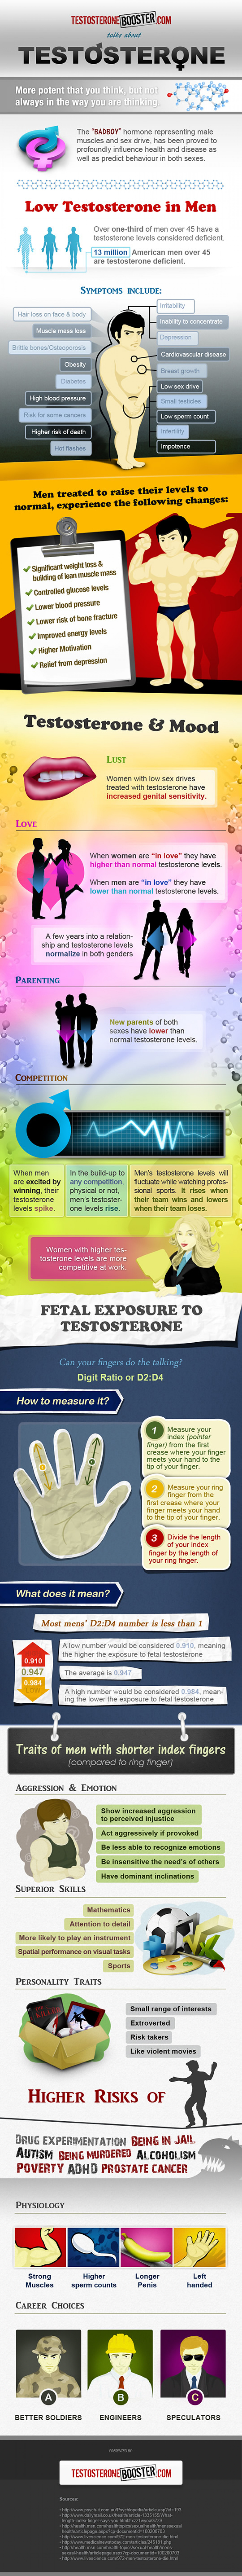 Testosterone: Potent But Not Always In The Way You Think Infographic